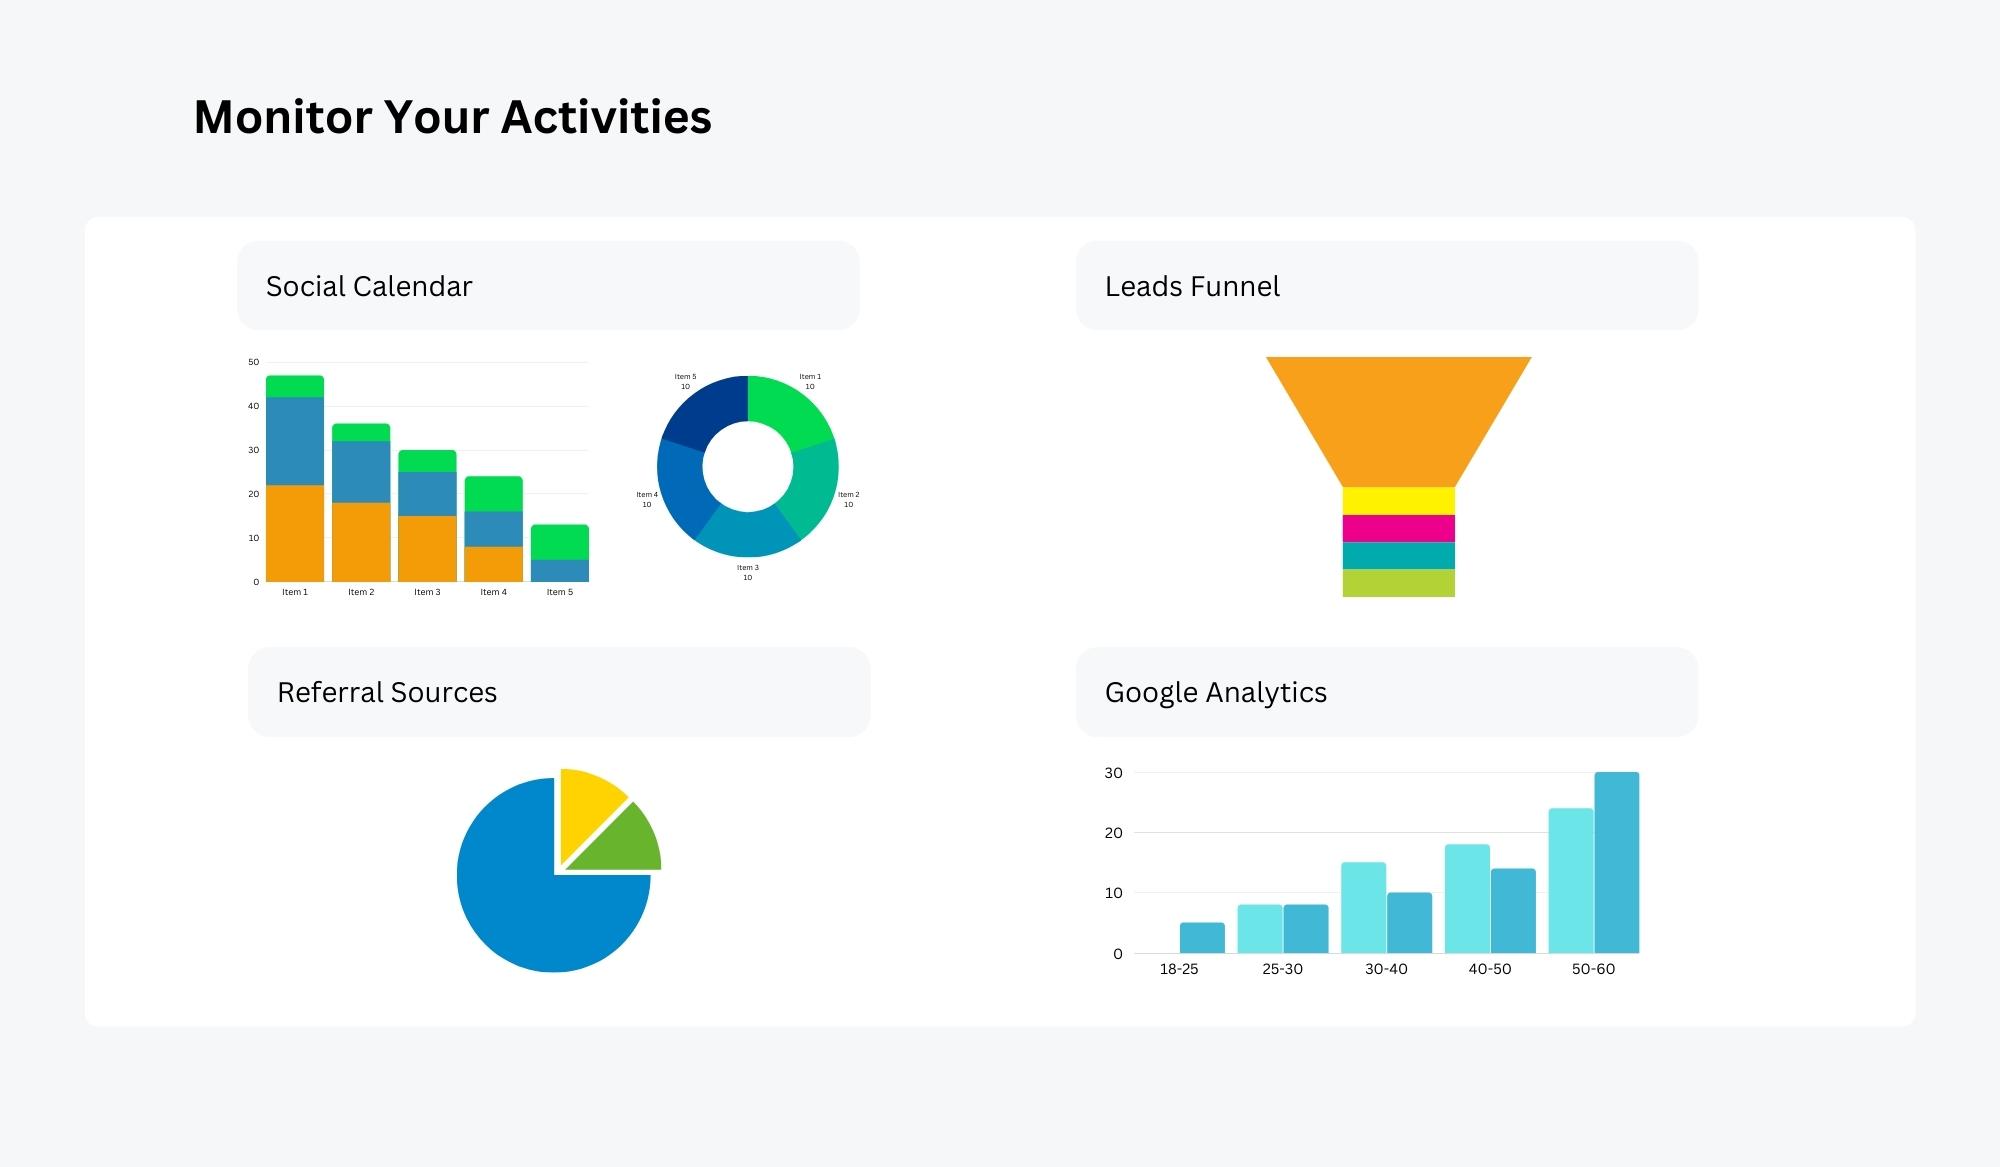 Track your activities across different tools and channels. Check the performance of your website, social media profiles, email marketing campaigns, automations, landing pages and leads.